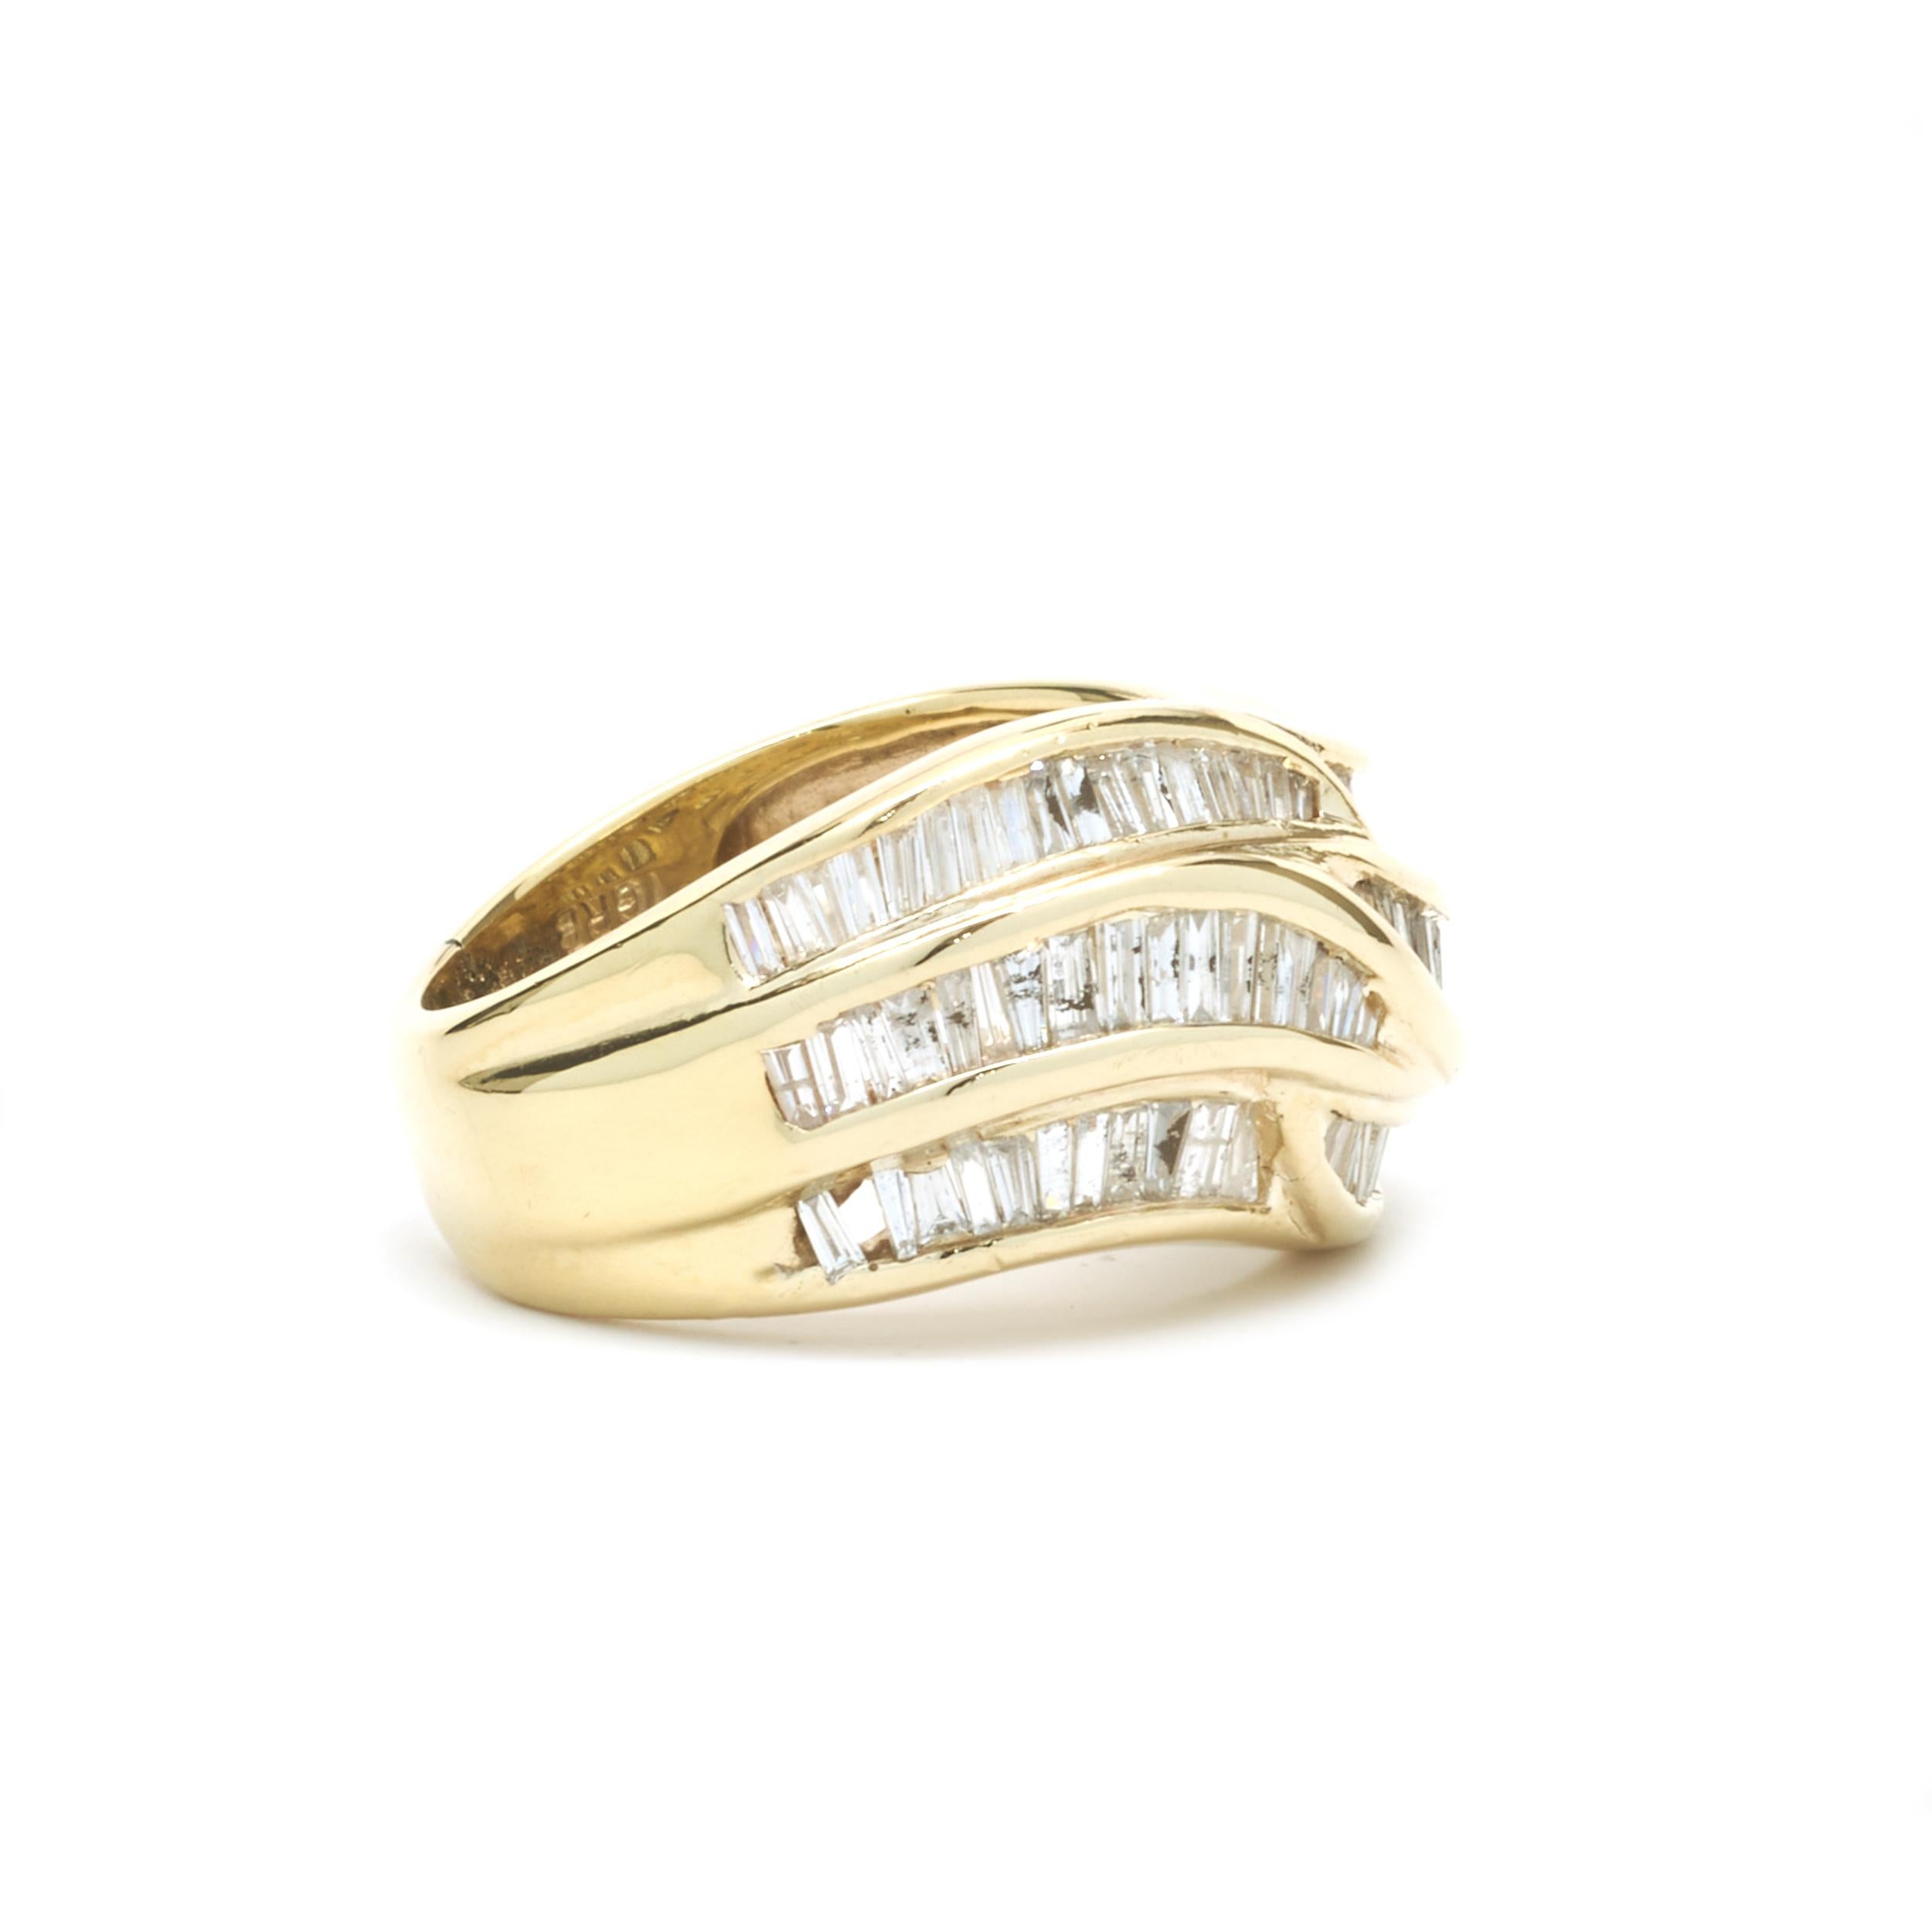 Designer: custom
Material: 14K yellow gold
Diamond: 100 baguette cut = 1.50cttw
Color: G
Clarity: SI1
Ring size: 5.5 (please allow two additional shipping days for sizing requests)
Weight:  7.37 grams
